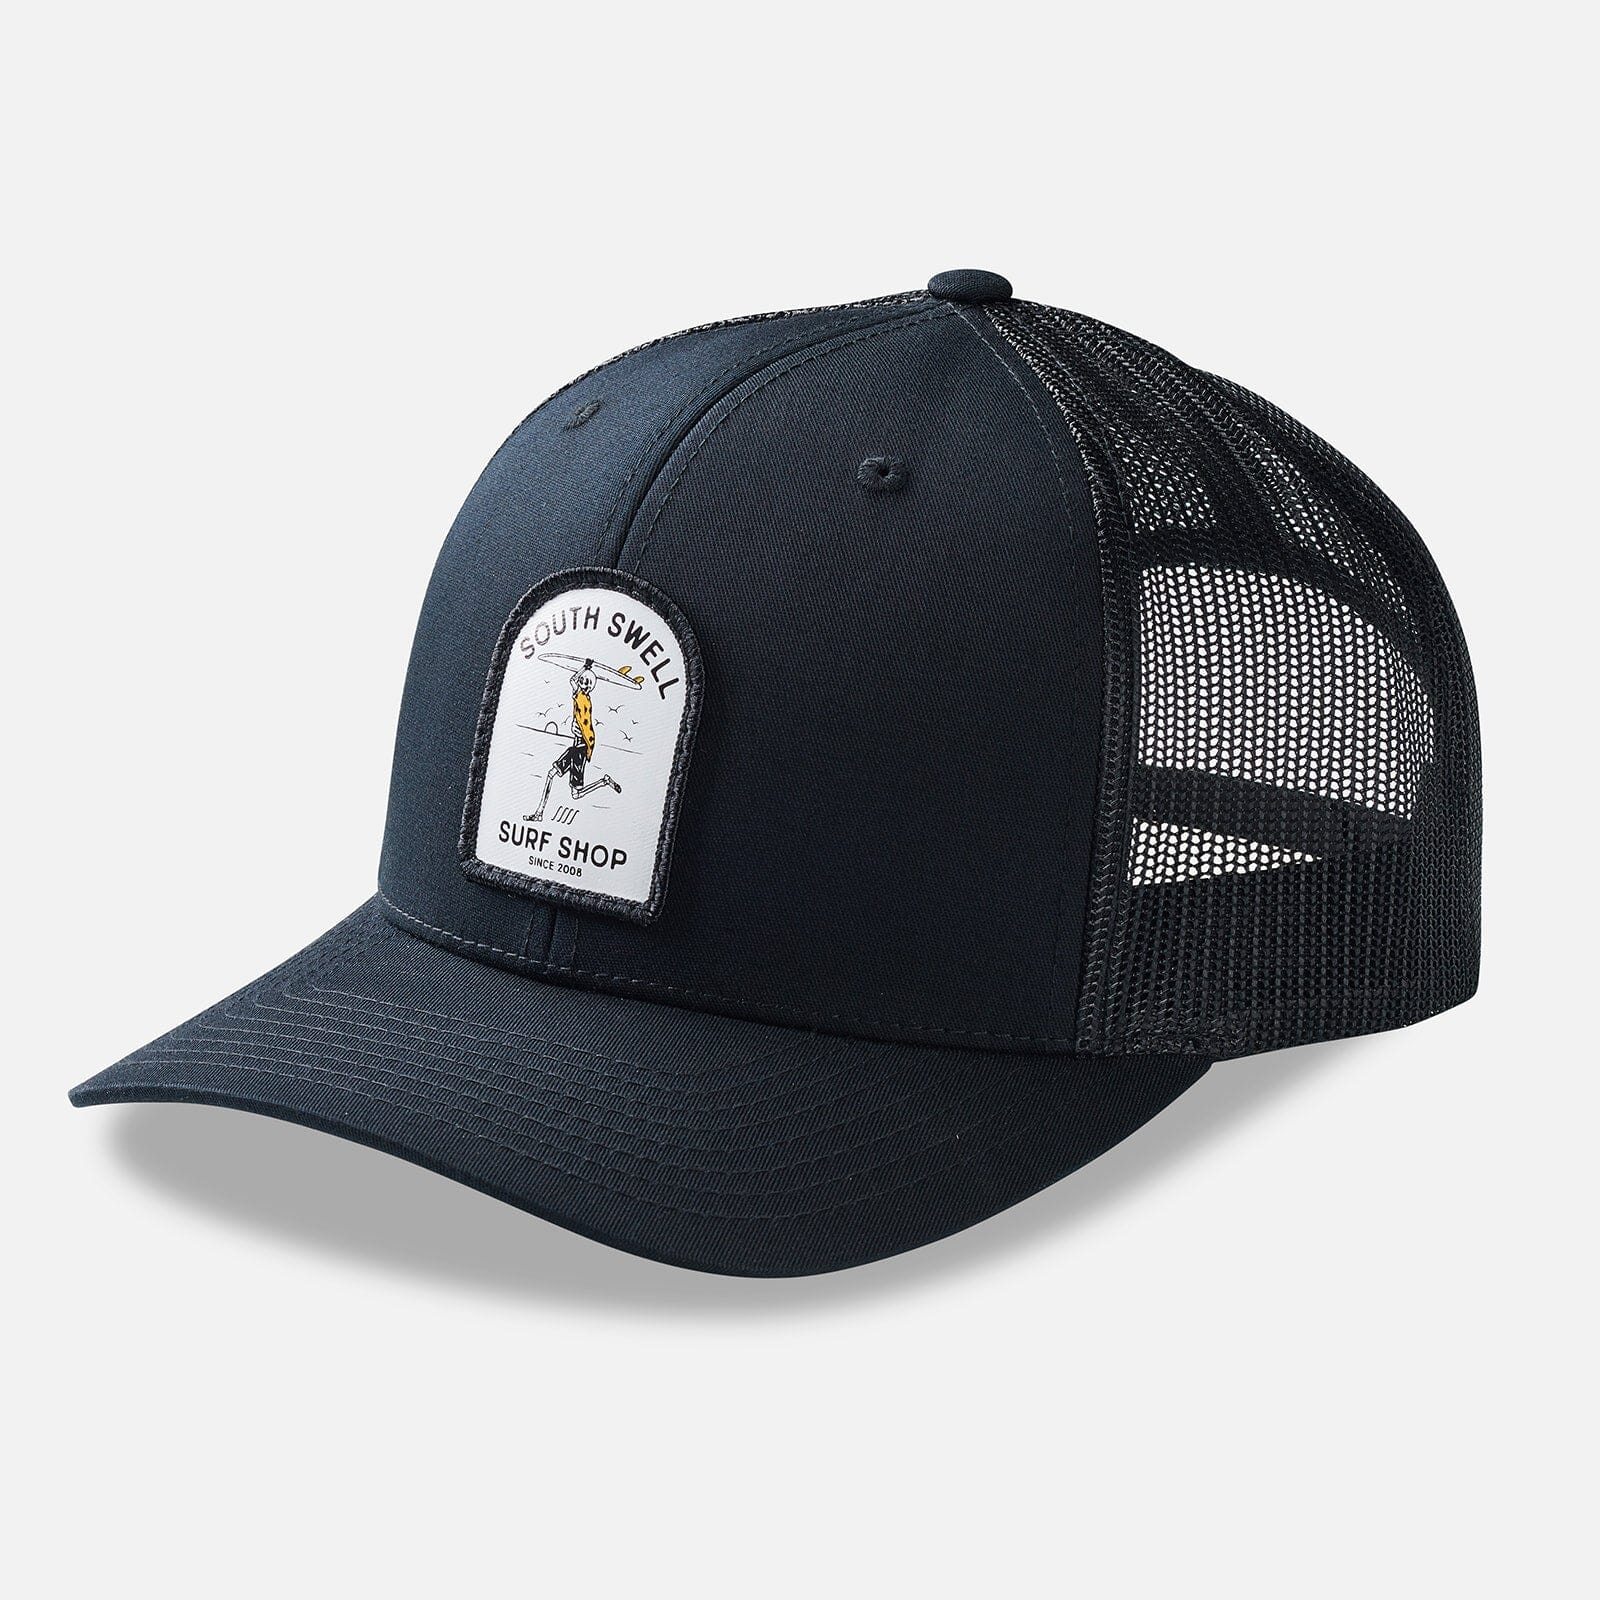 SOUTH SWELL Shred Til Dead Youth Trucker Hat Hats SOUTH SWELL 